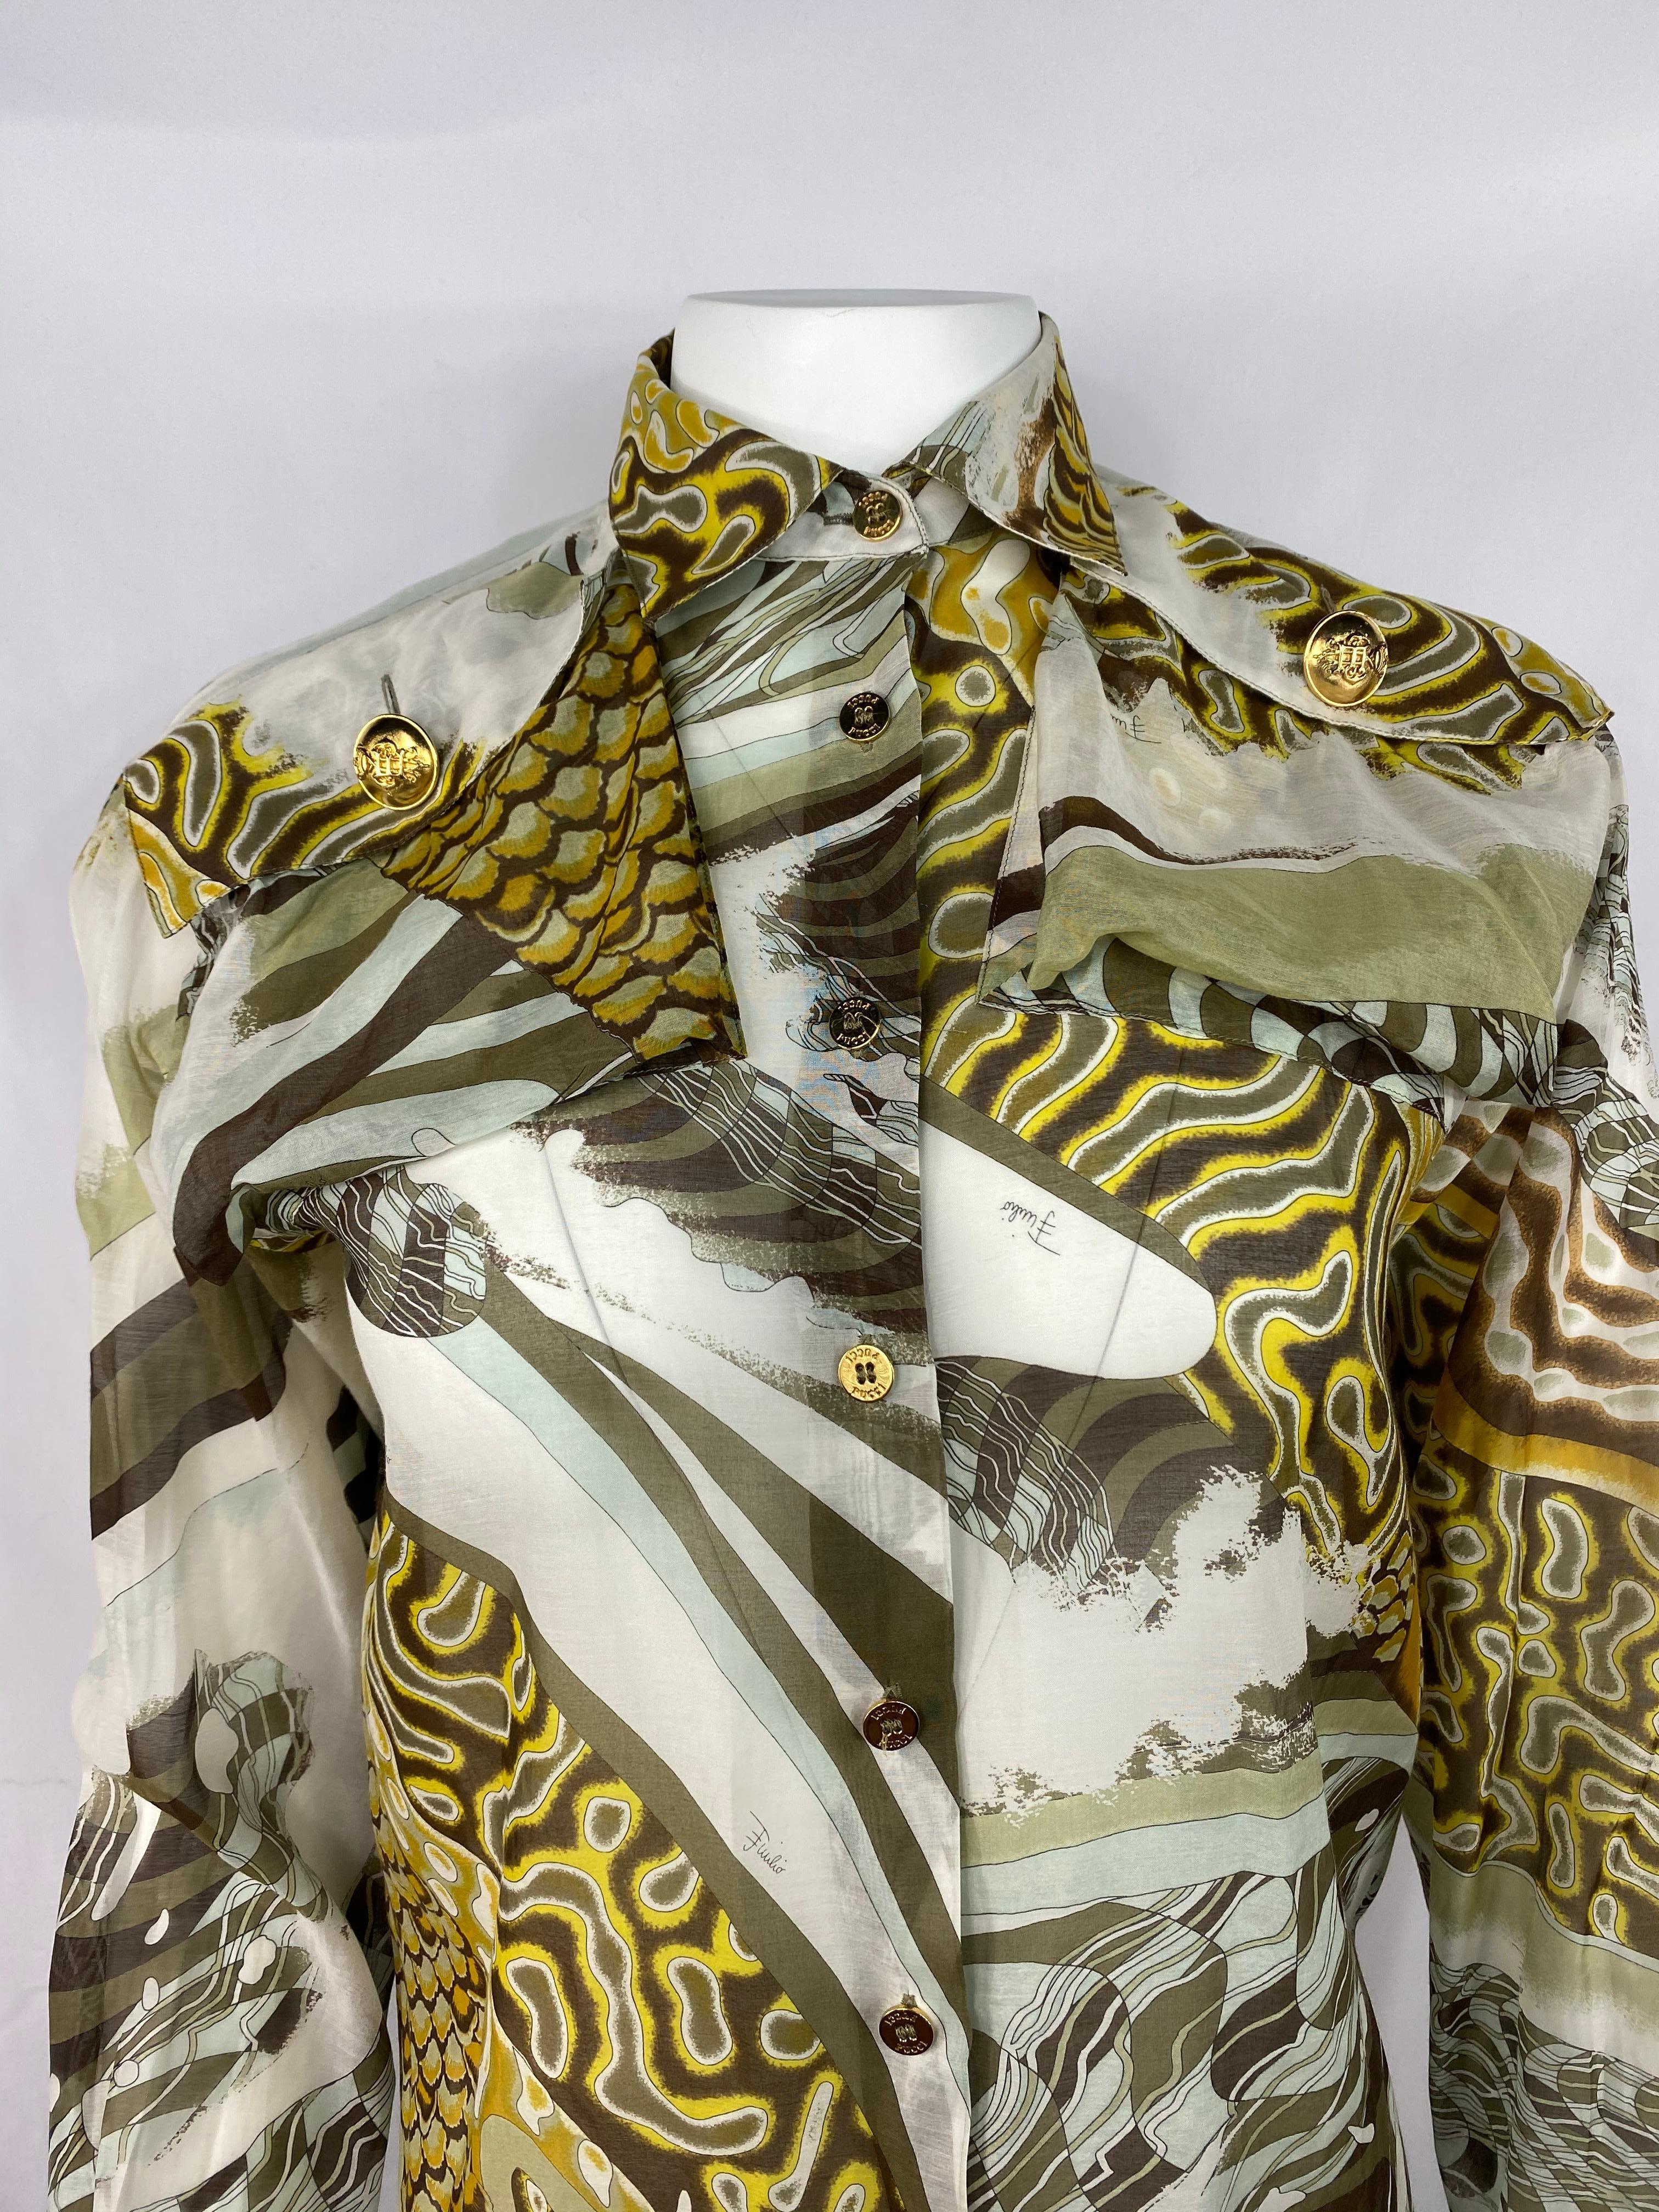 Product details:

Featuring silk and cotton blend, brown, white, blue, yellow and green abstract print, front gold tone buttons closure, stamped  PUCCI, dual front pockets  located at the shoulder area with the large gold tone button, collar and